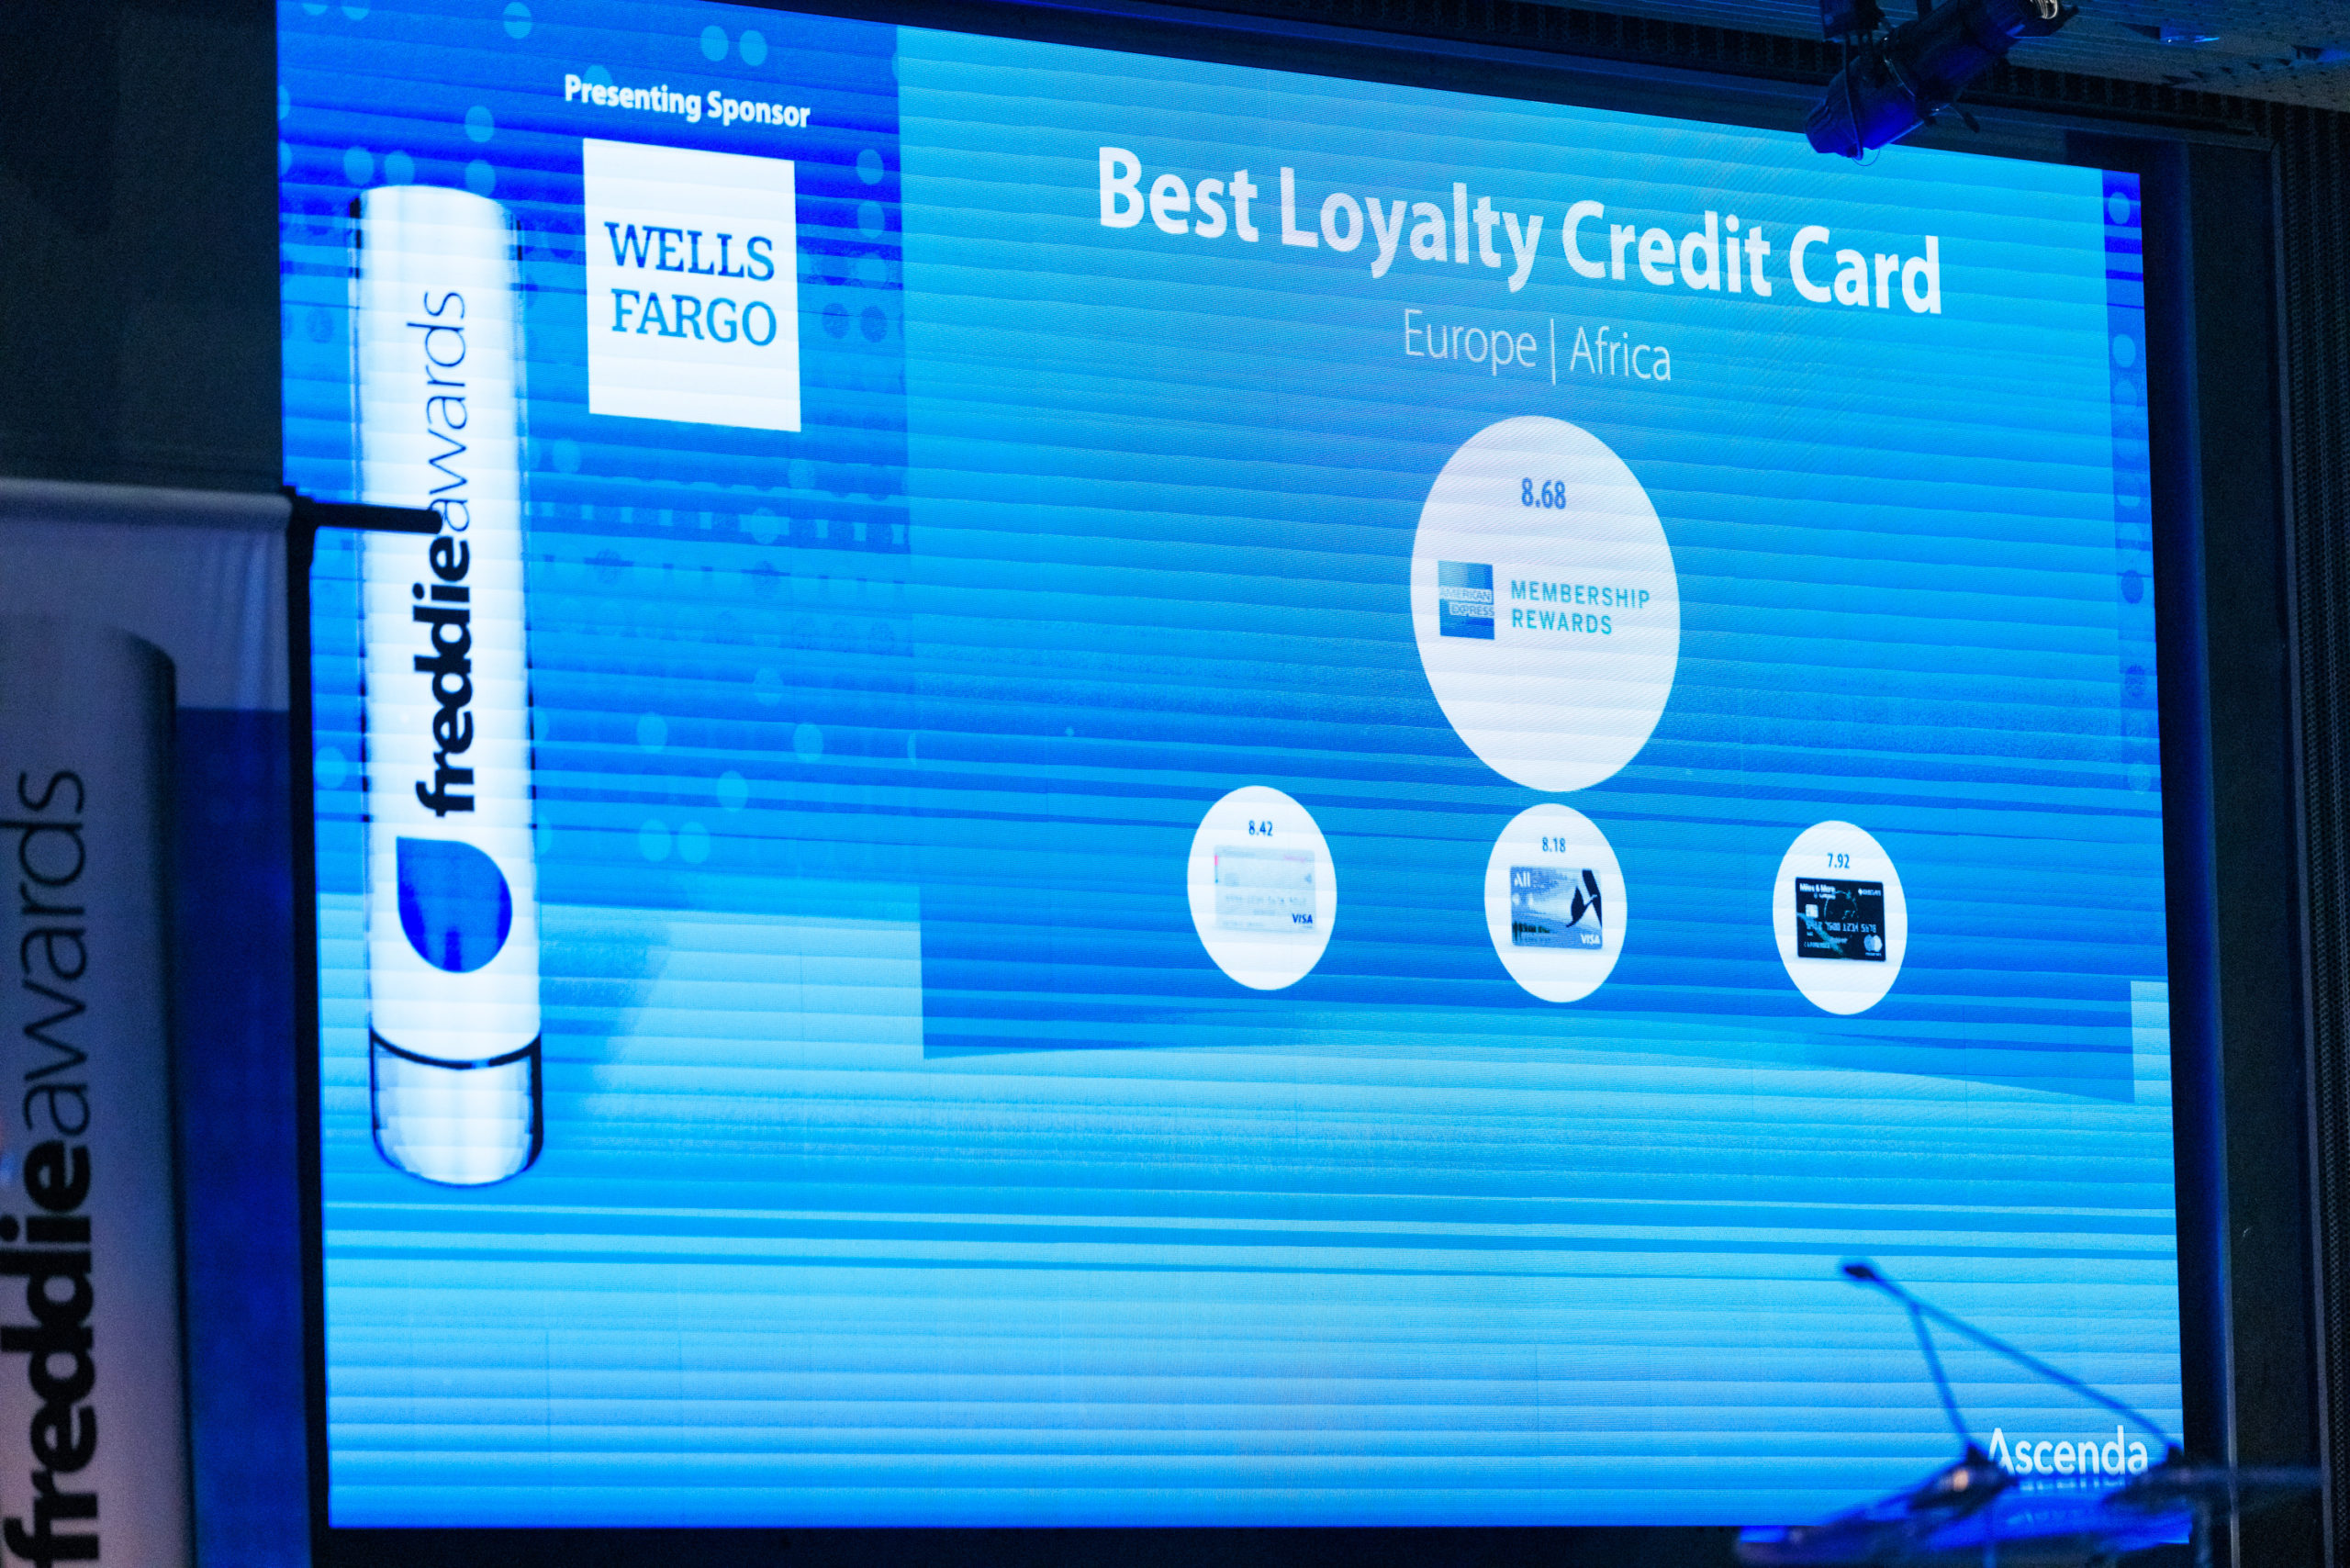 Best Loyalty Credit Card Europe and Africa